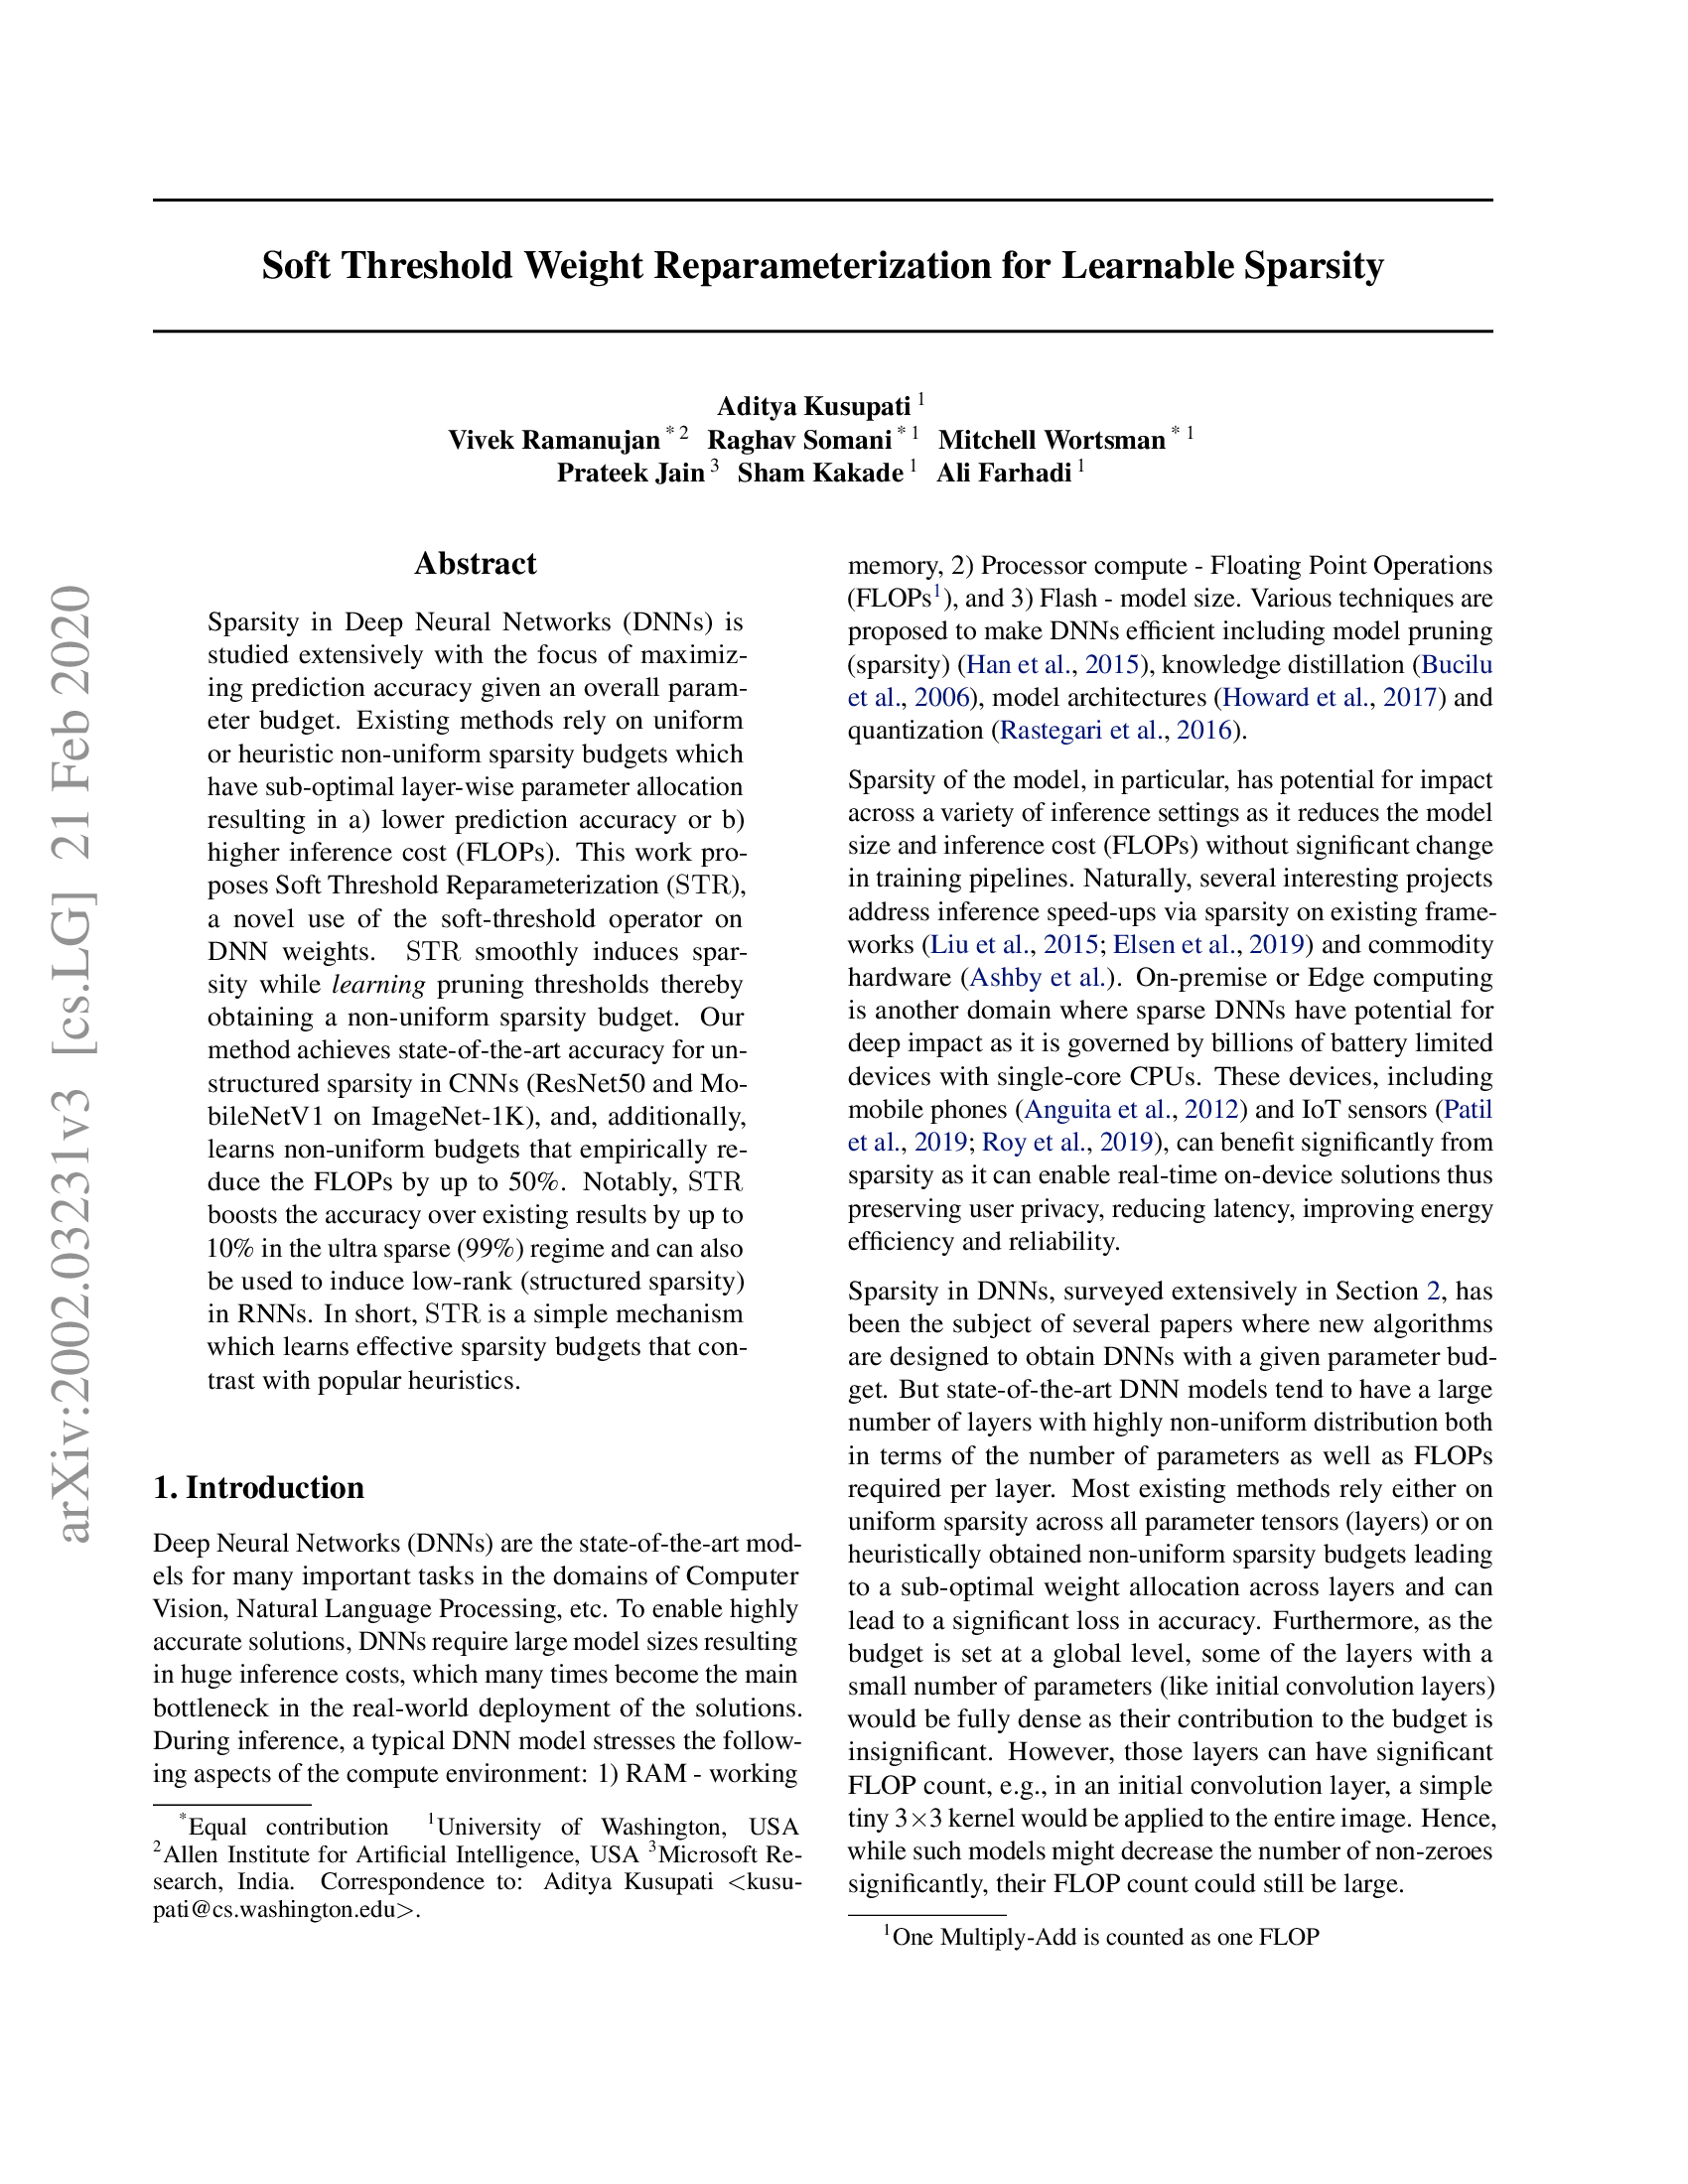 Soft Threshold Weight Reparameterization for Learnable Sparsity